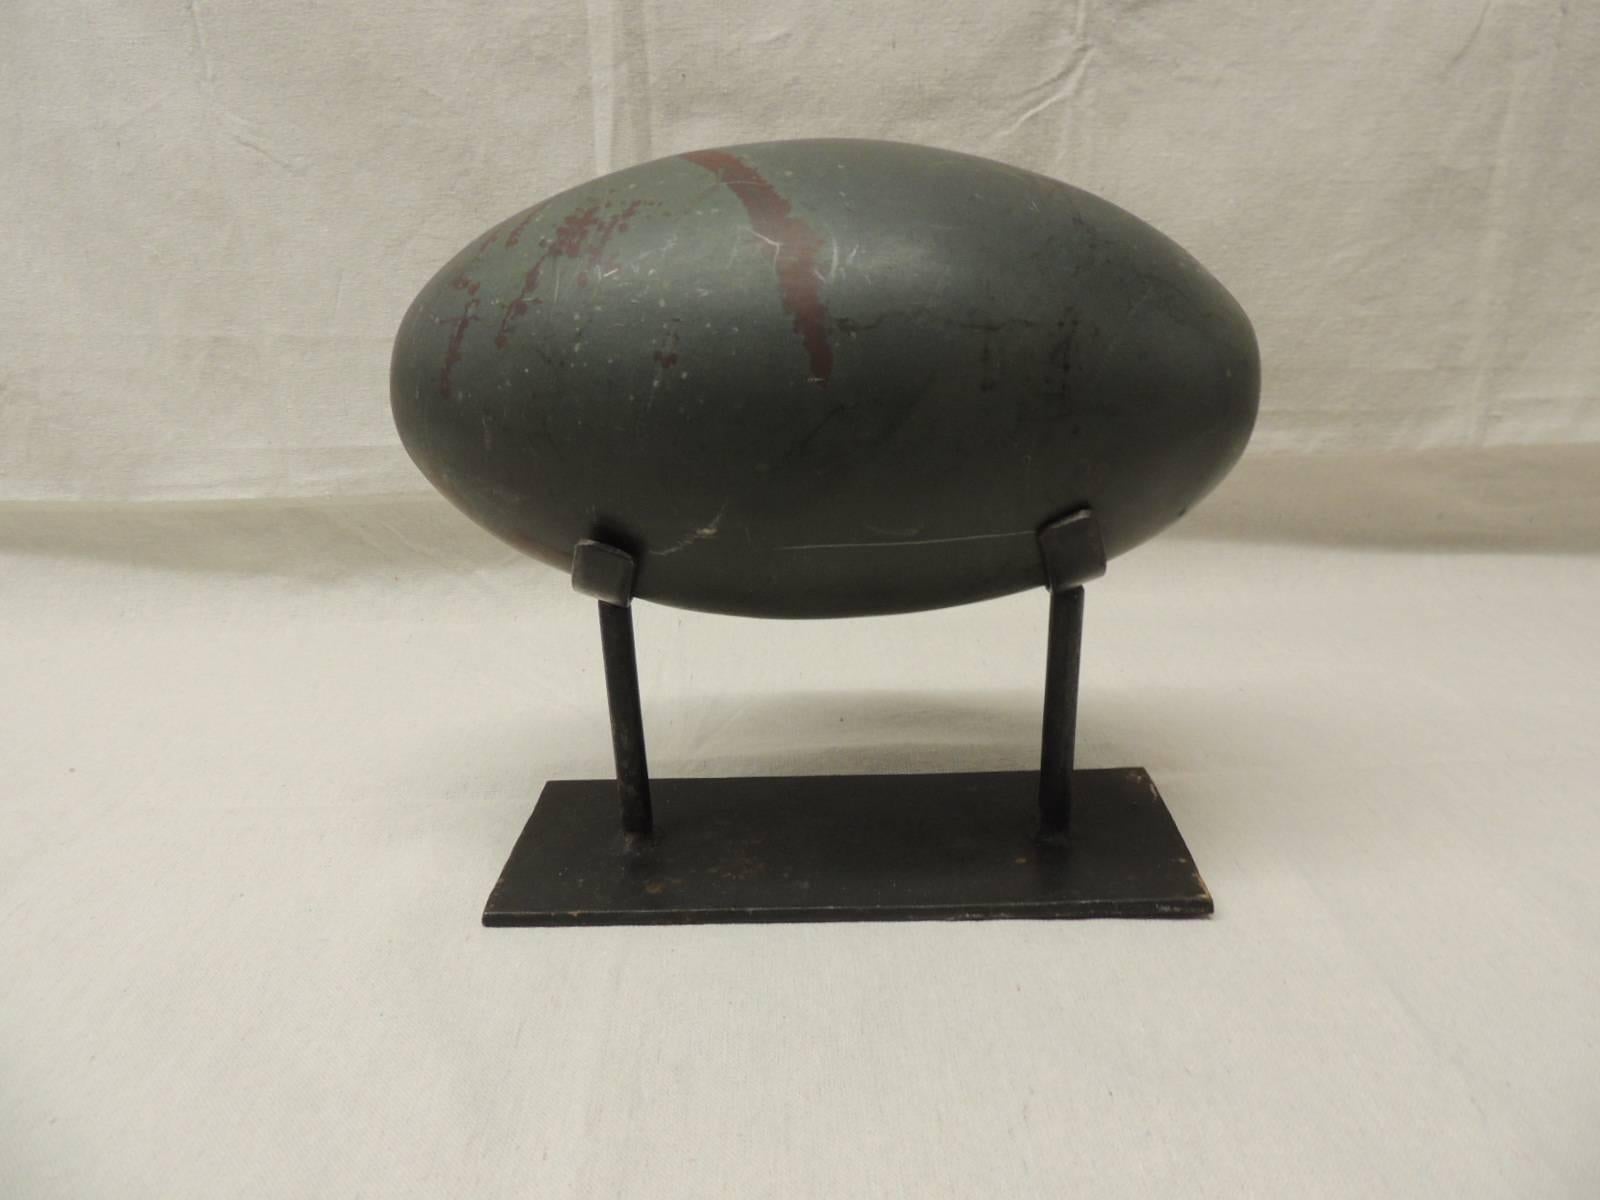 Large Shiva sculptural stone egg on custom iron stand. Deep grey and red natural coloring.
Stand: 10 x 4 x 10.